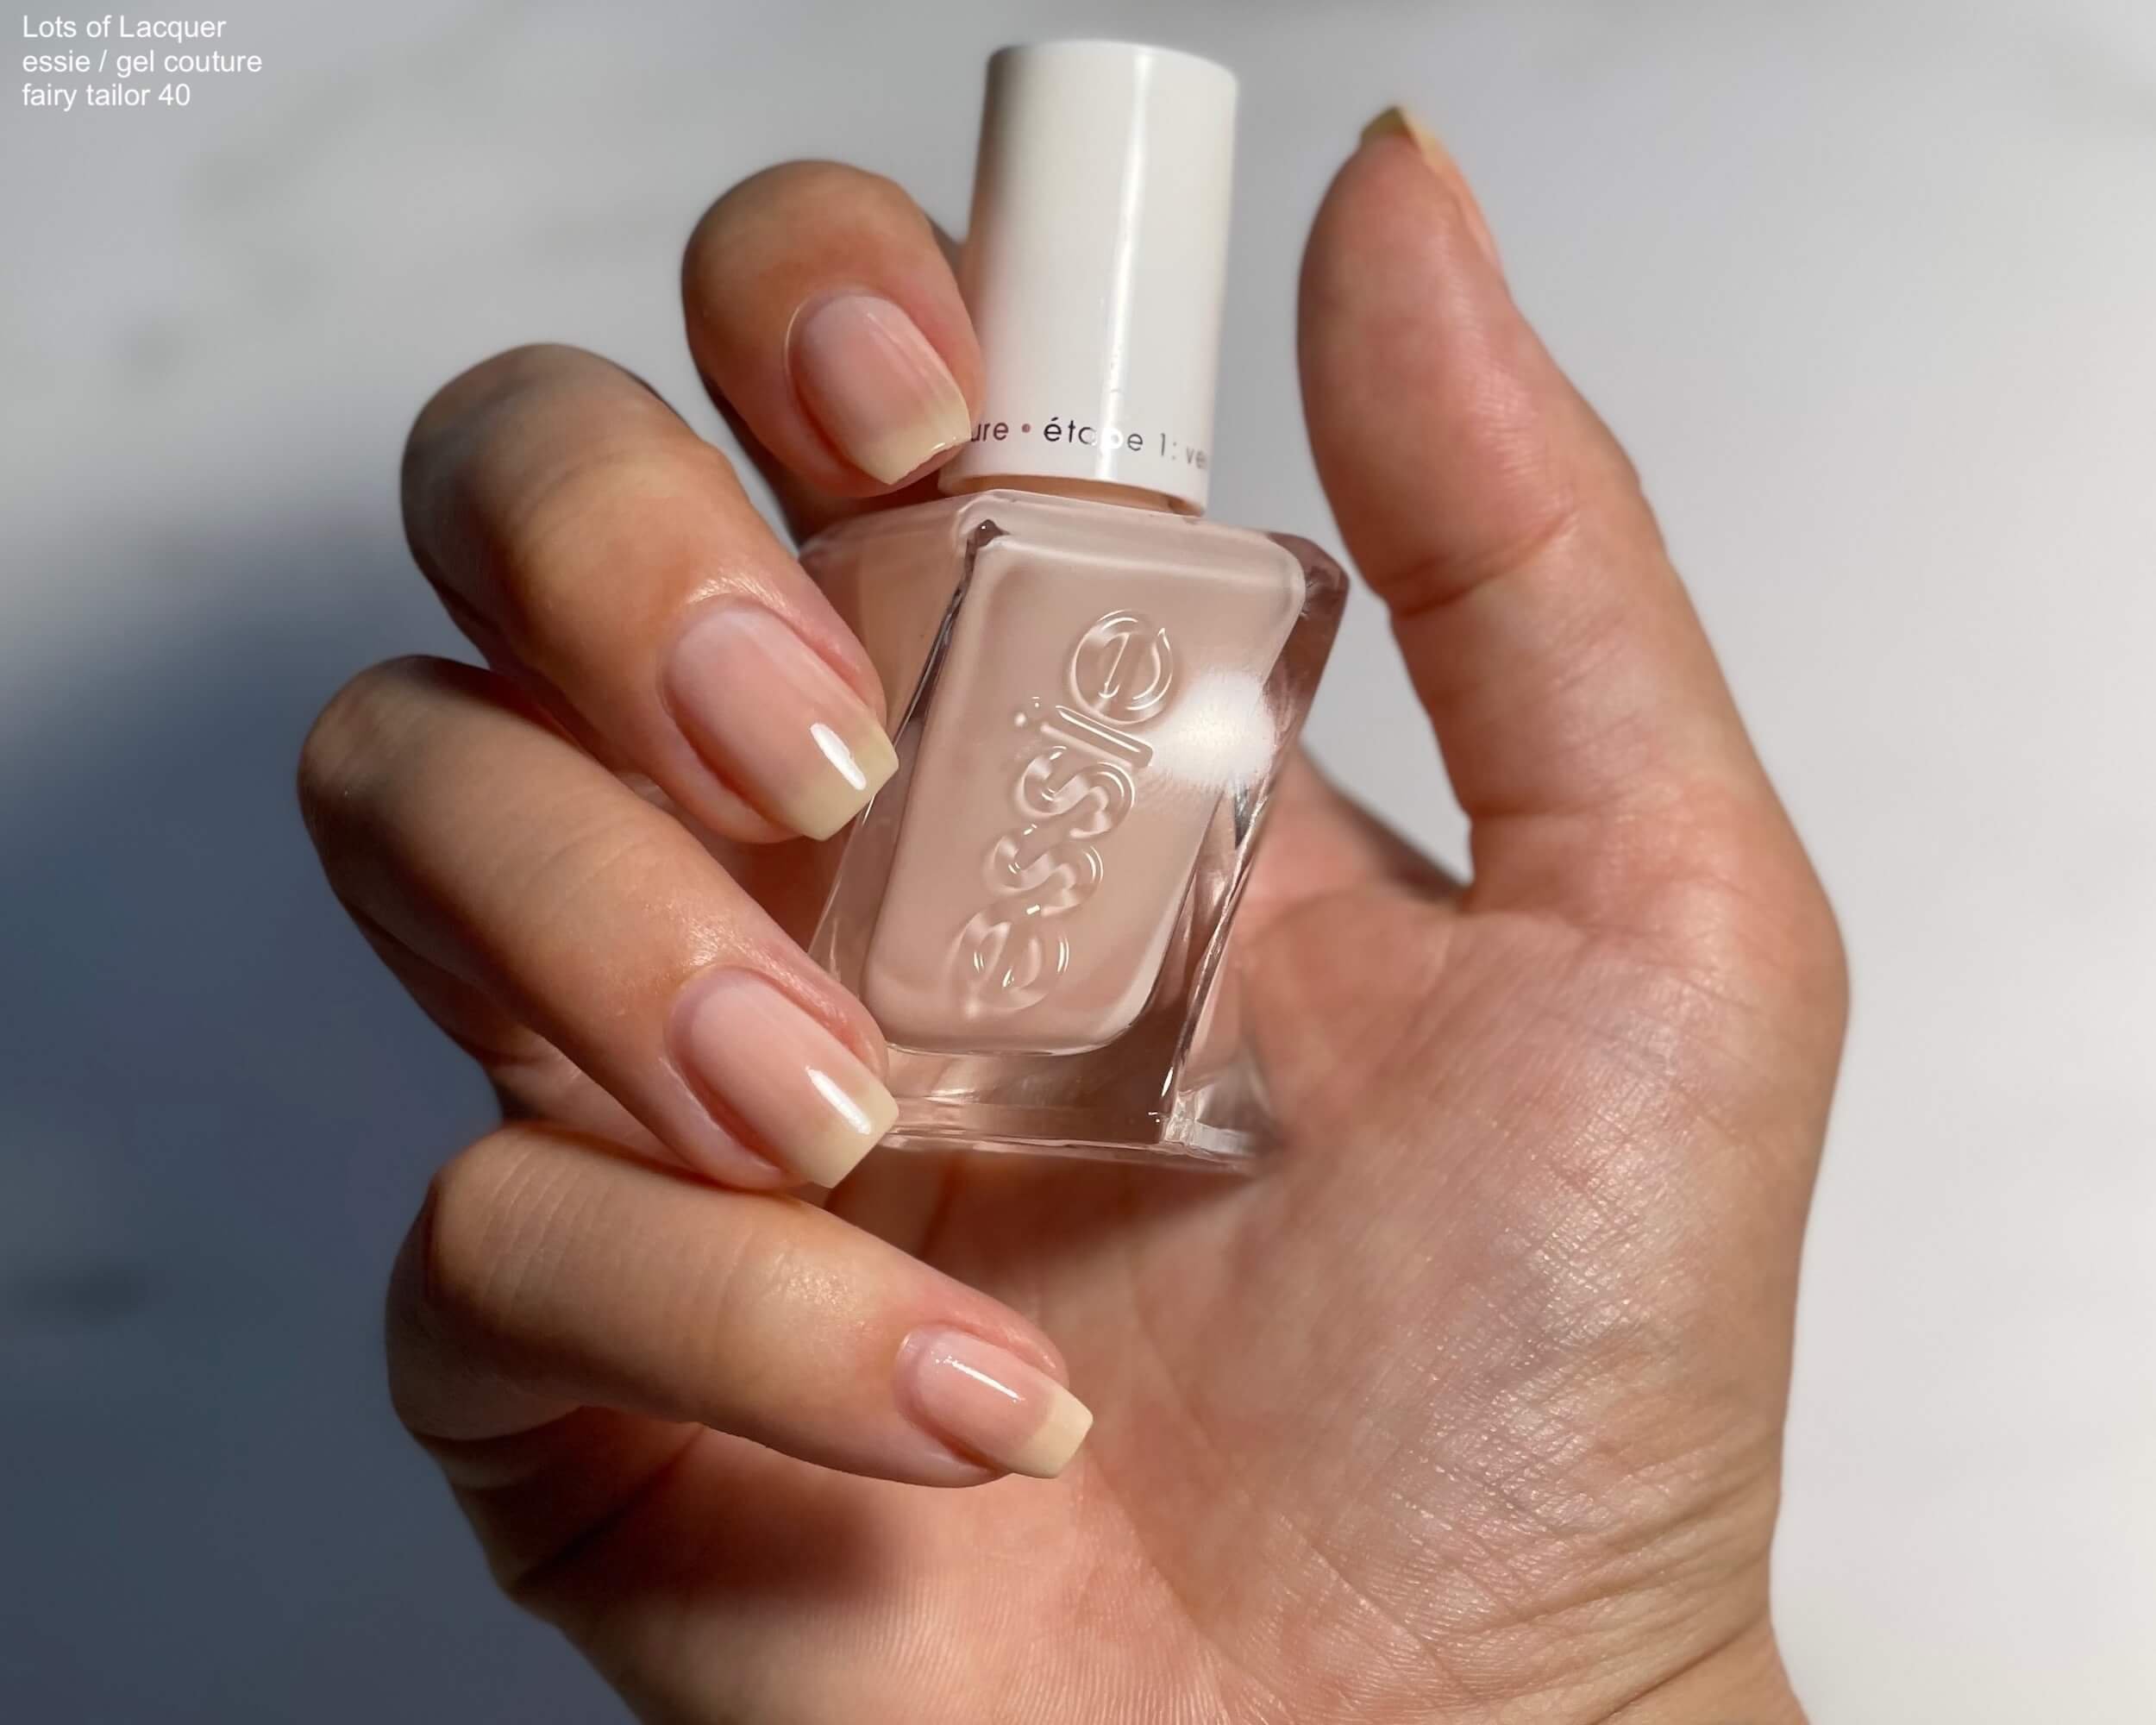 2. Essie Gel Couture Nail Polish in "Fairy Tailor" - wide 8